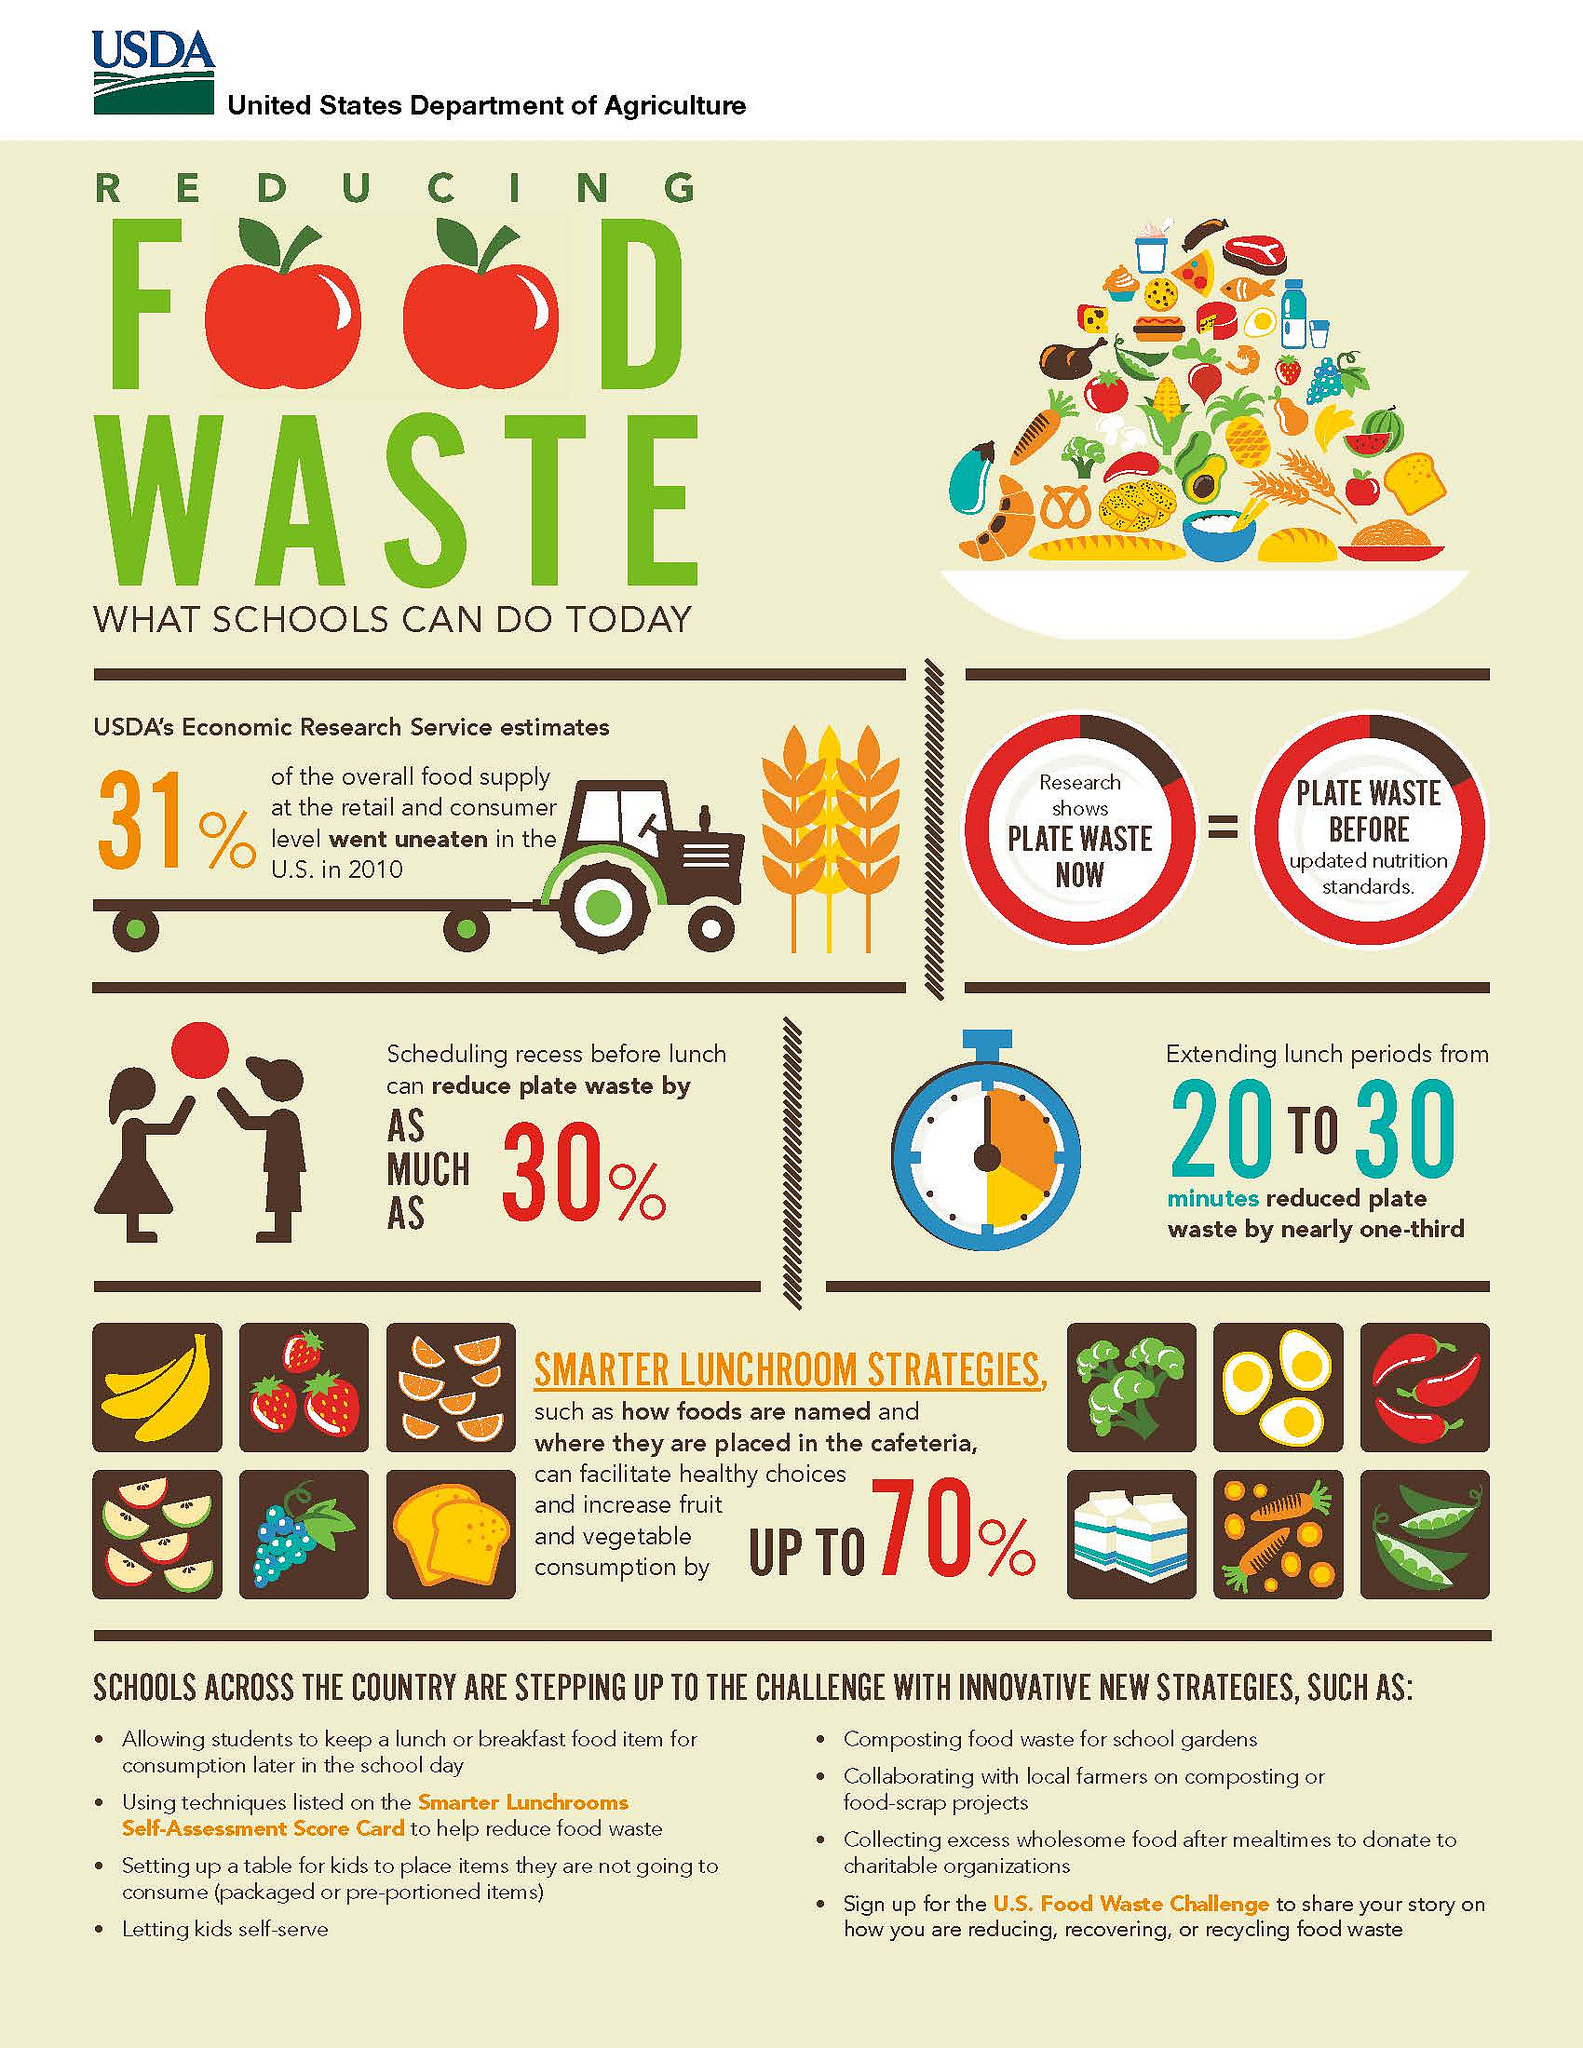 Infographic: Reducing Food Waste: What Schools Can Do Today. Image of a plate piled with clip art of food items at top. Next block: image of tractor pulling flat trailer towards wheat. USDA's Economic Research Service estimates 31% of the overall food supply at the retail and consumer level went uneaten in the U.S. in 2010. Next block: two pie charts on plates. Left: Research shows Plate Waste Now (10% of plate chart in dark brown, rest in red) = Plate waste before updated nutrition standards (also 10% dark on pie chart compared to rest in bright red). Next block: two children playing with a red ball. Scheduling recess before lunch can reduce plate waste by as much as 30%. Next block: stop watch with 20 seconds marked in bright orange, next 10 seconds in yellow, rest in white. Extending lunch periods from 20 to 30 minutes reduced plate waste by nearly one-third. Next block: Brown squares with drawings of food items surround text in middle. Smarter lunchroom strategies, such as how foods are named and where they are placed in the cafeteria, can facilitate healthy choices and increase fruit and vegetable consumption by up to 70%. Last block: Schools across the country are stepping up to the challenge with innovative new strategies, such as: Allowing students to keep a lunch or breakfast food item for consumption later in the school day. Using techniques listed on the Smarter Lunchrooms Self-Assessment Score Card to help reduce food waste. Setting up a table for kids to place items they are not going to consume (packaged or pre-portioned items). Letting kids self-serve. Composting food waste for school gardens. Collaborating with local farmers on composting or food-scrap projects. Collecting excess wholesome food after mealtimes to donate to charitable organizations. Sign up for the U.S. Food Waste Challenge to share your story on how you are reducing, recovering, or recycling food waste.